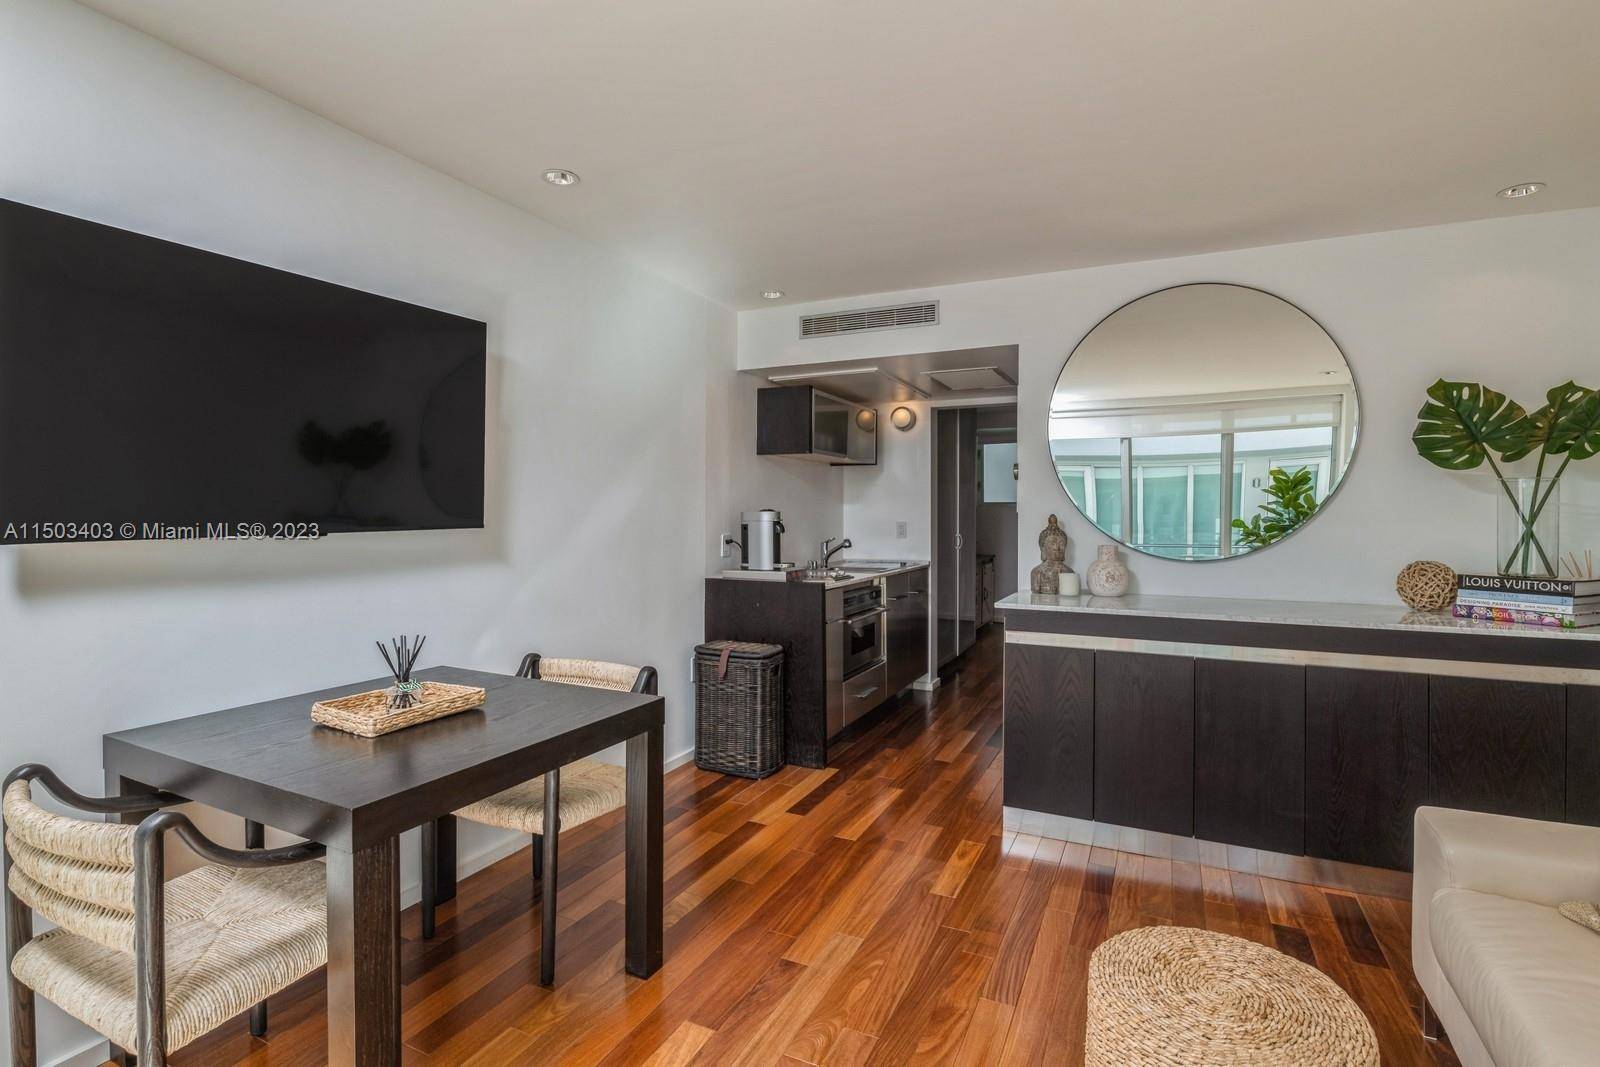 Fully furnished 1 1 South Beach luxury condo located one block from Lincoln Road with top of the line finishes including, Brazilian teak floors, custom designed stainless steel kitchen cabinetry, ...